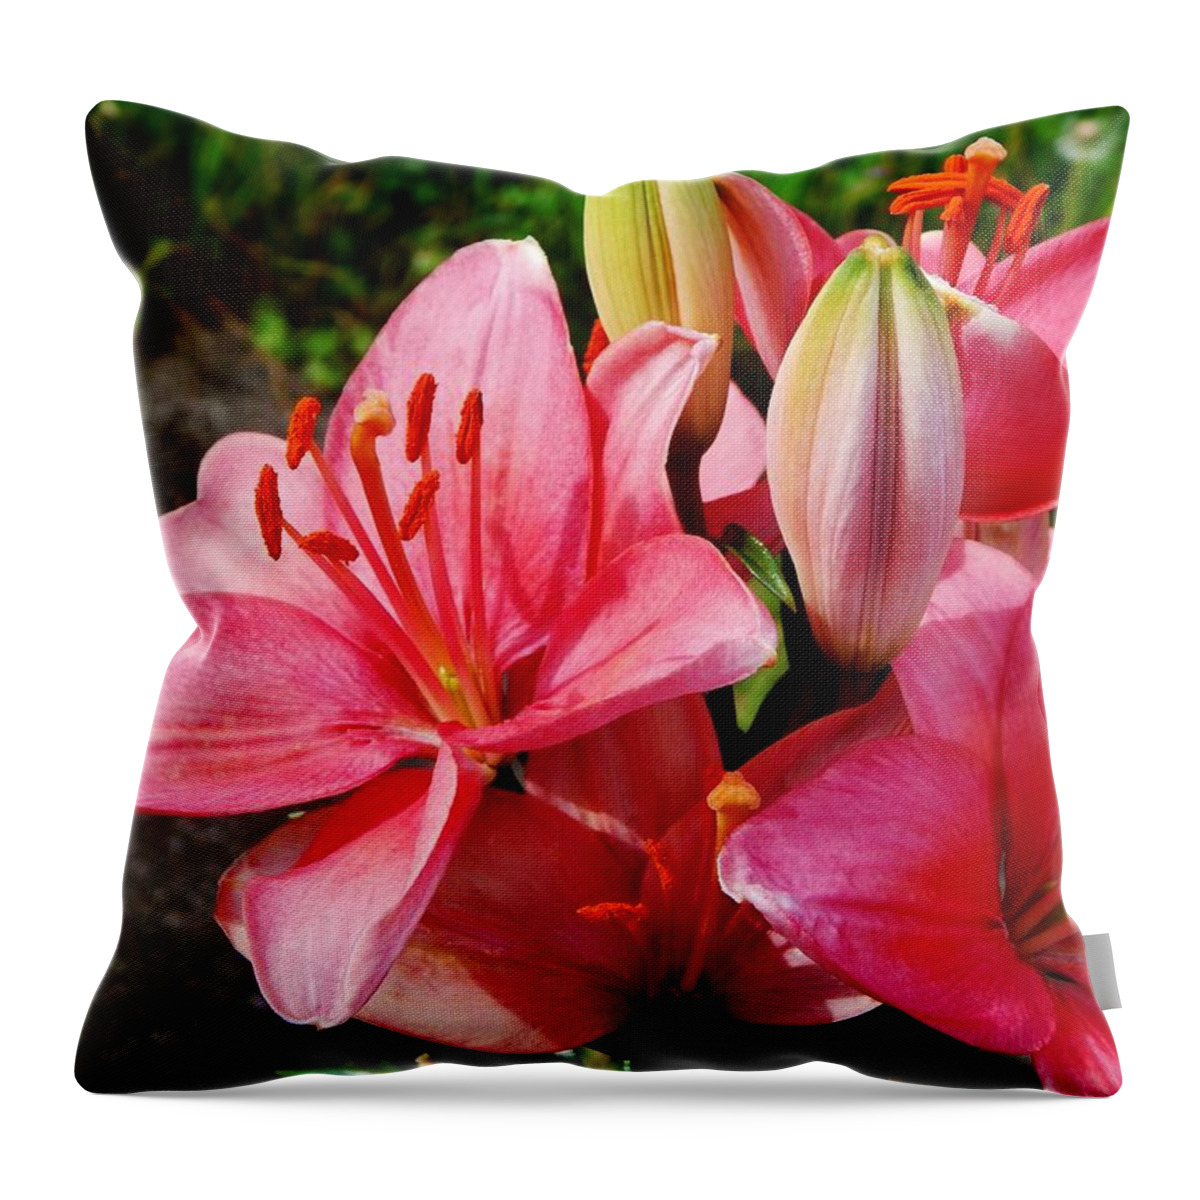 Flower Throw Pillow featuring the photograph Hybrid Oriental Lilies by VLee Watson